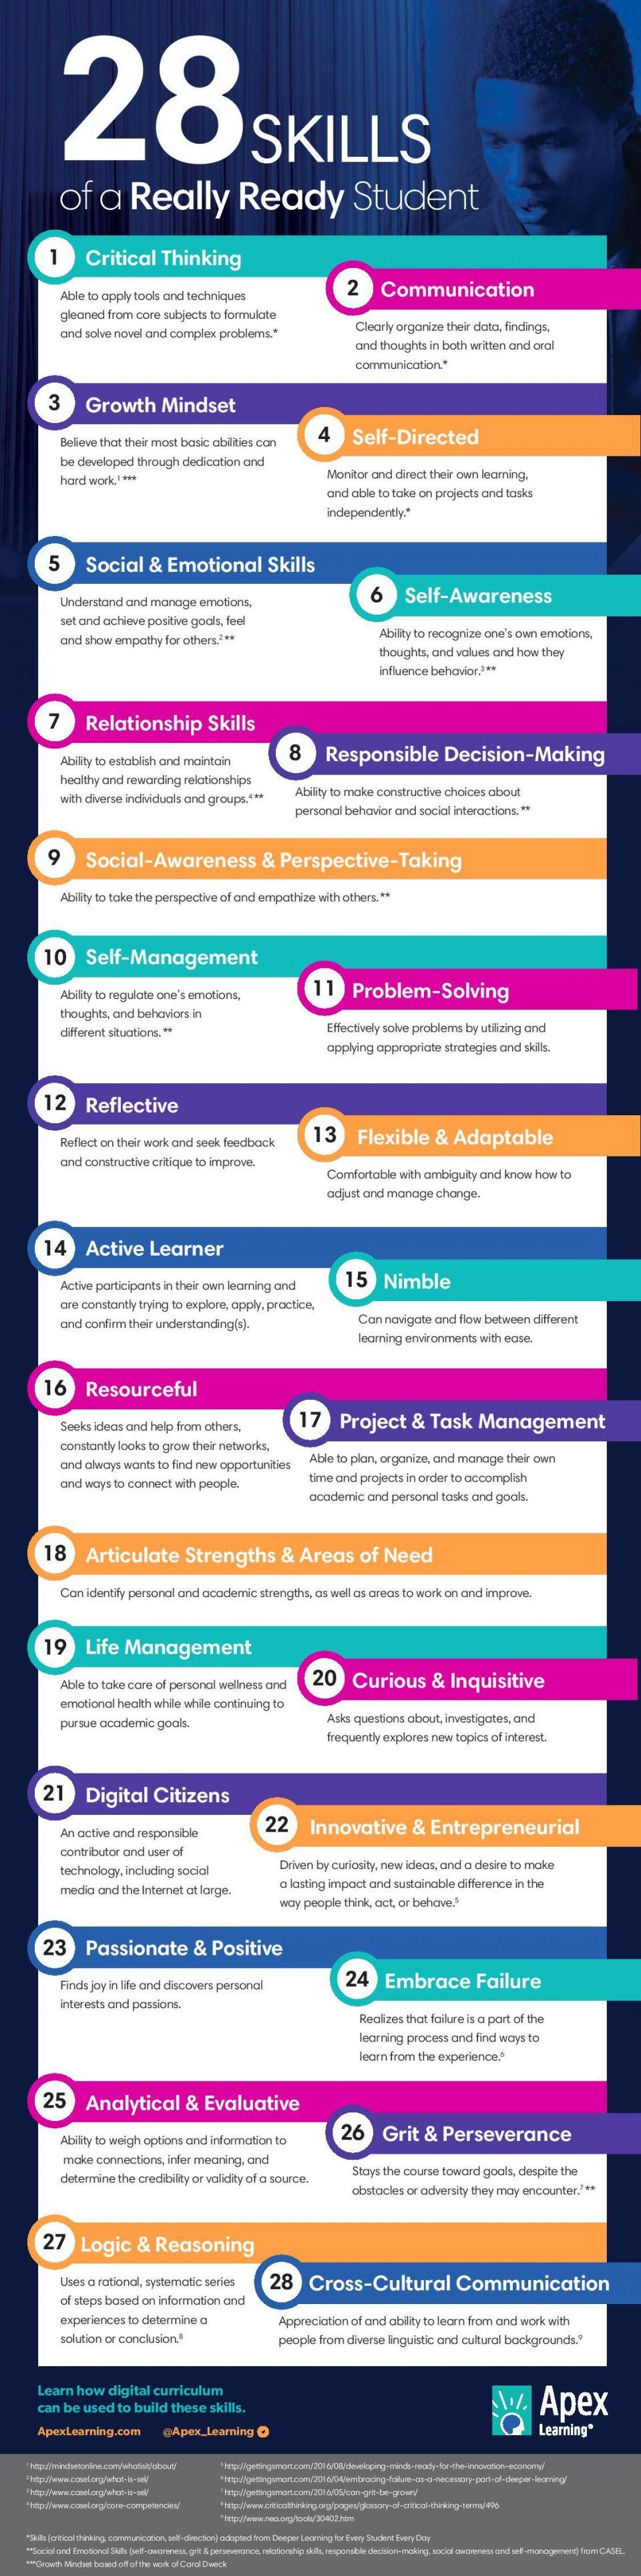 28 Skills of a Really Ready Student Infographic